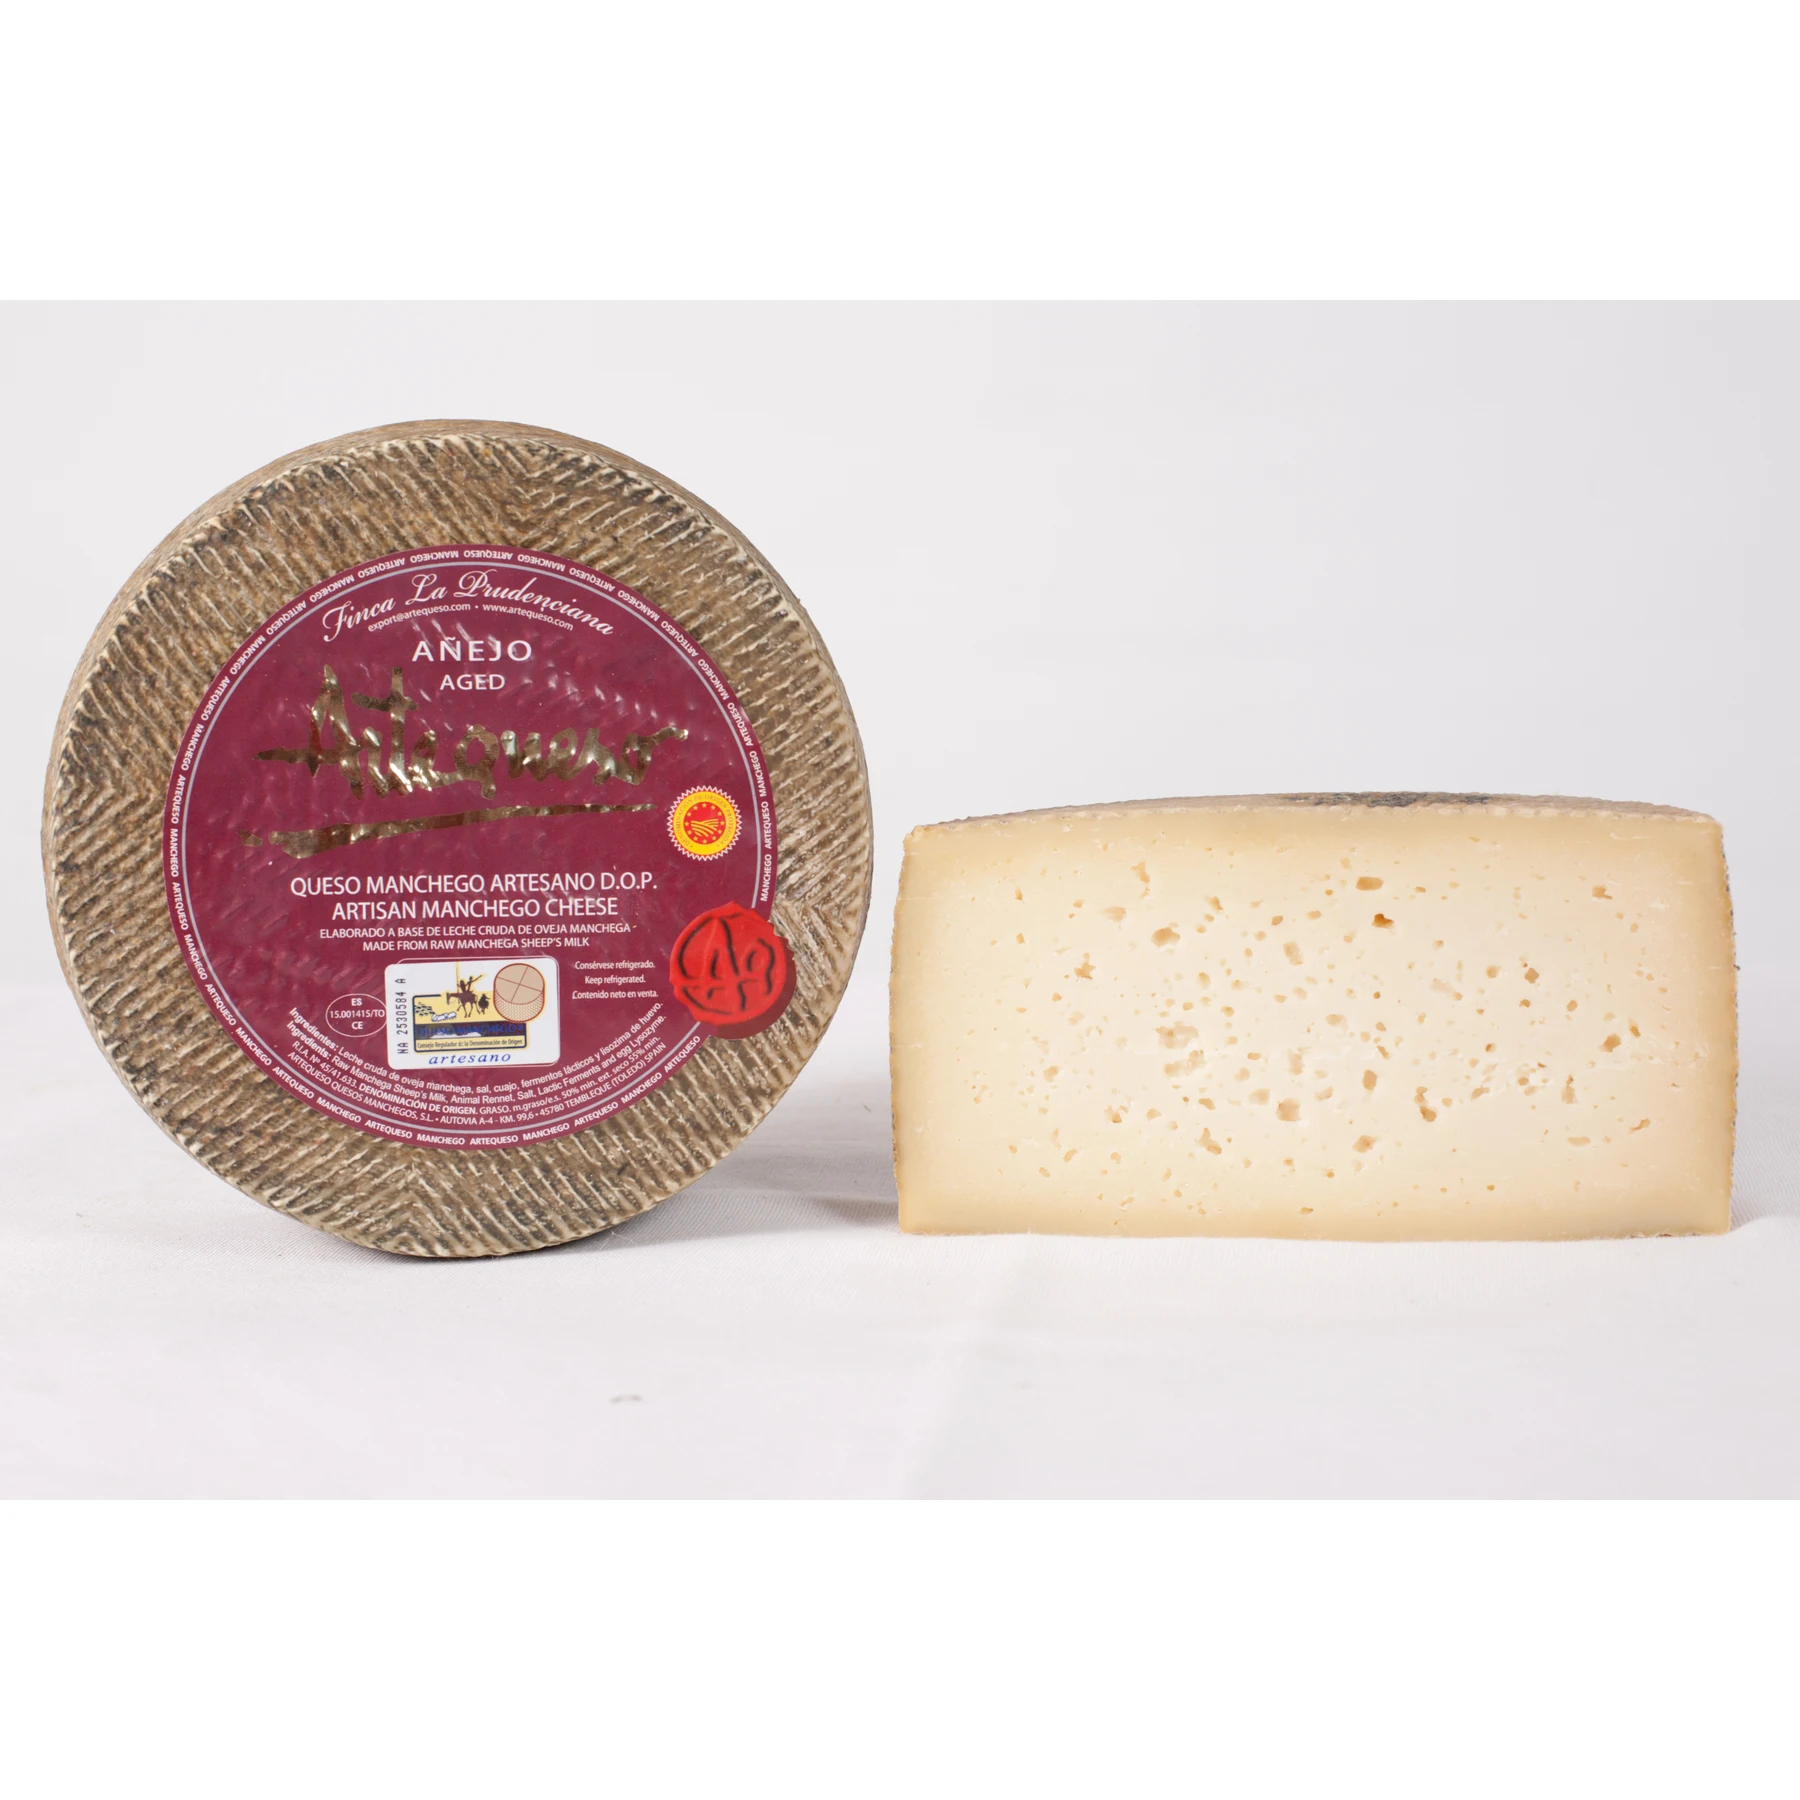 Manchego cheese craftsman aged D.O.P. -ARTEQUESO. -Piece 1.5Kg